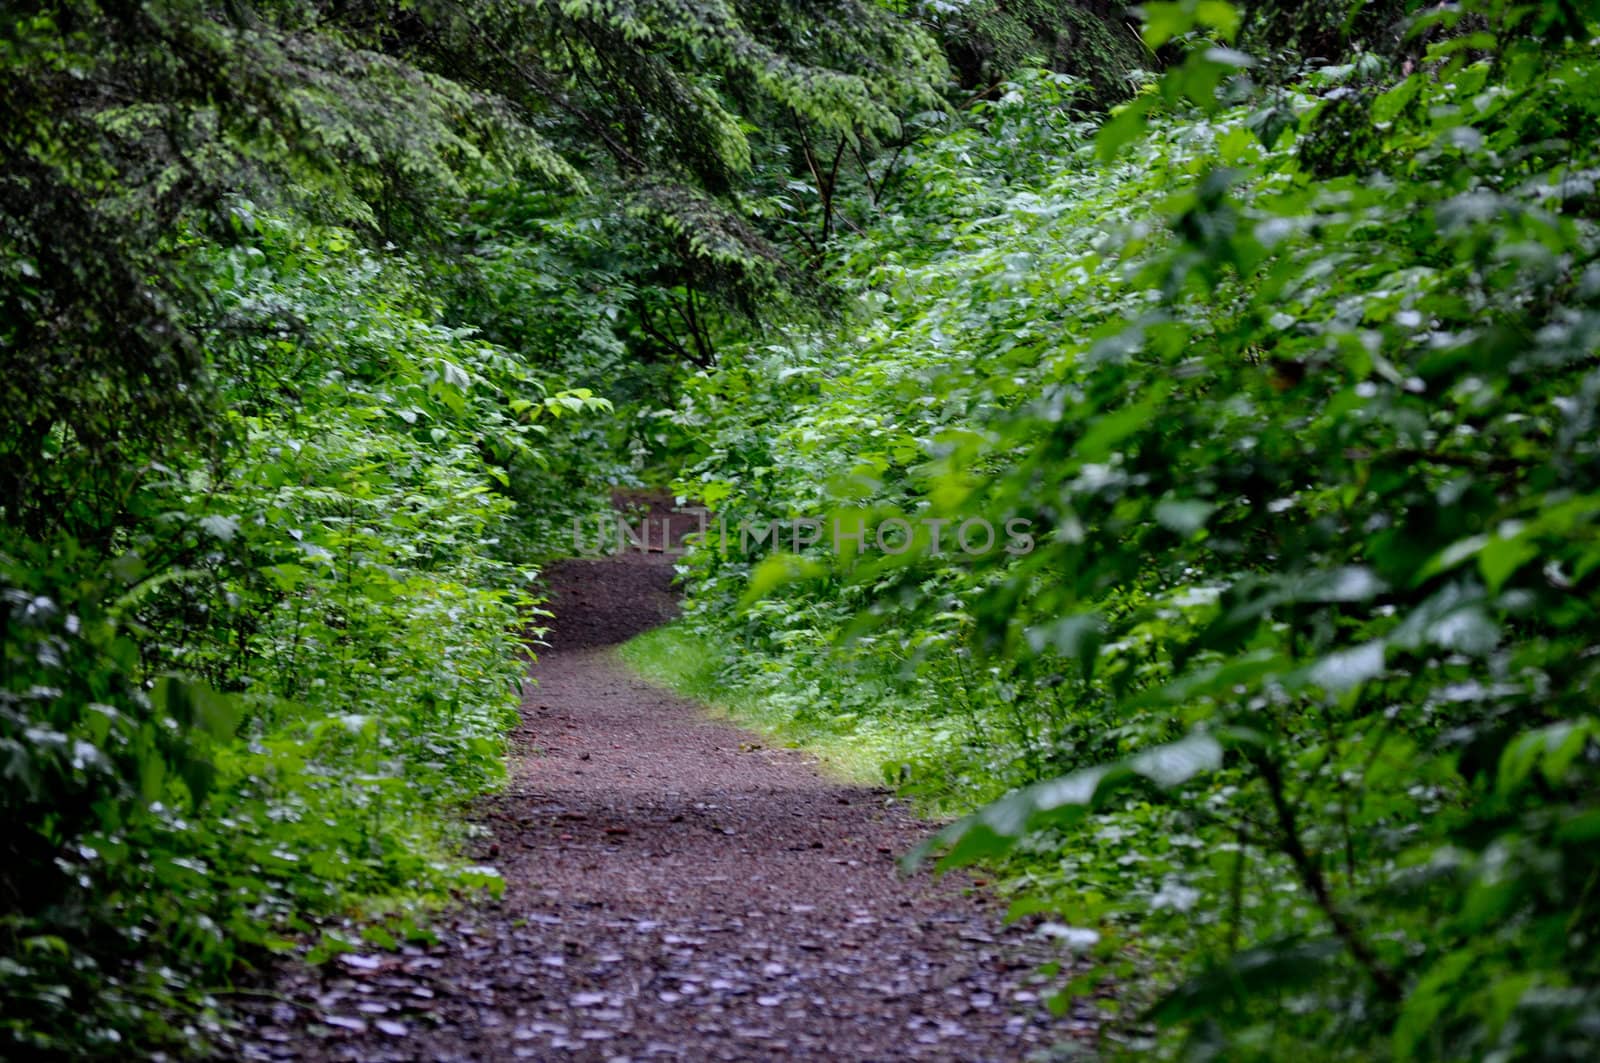 Path in the foliage by RefocusPhoto